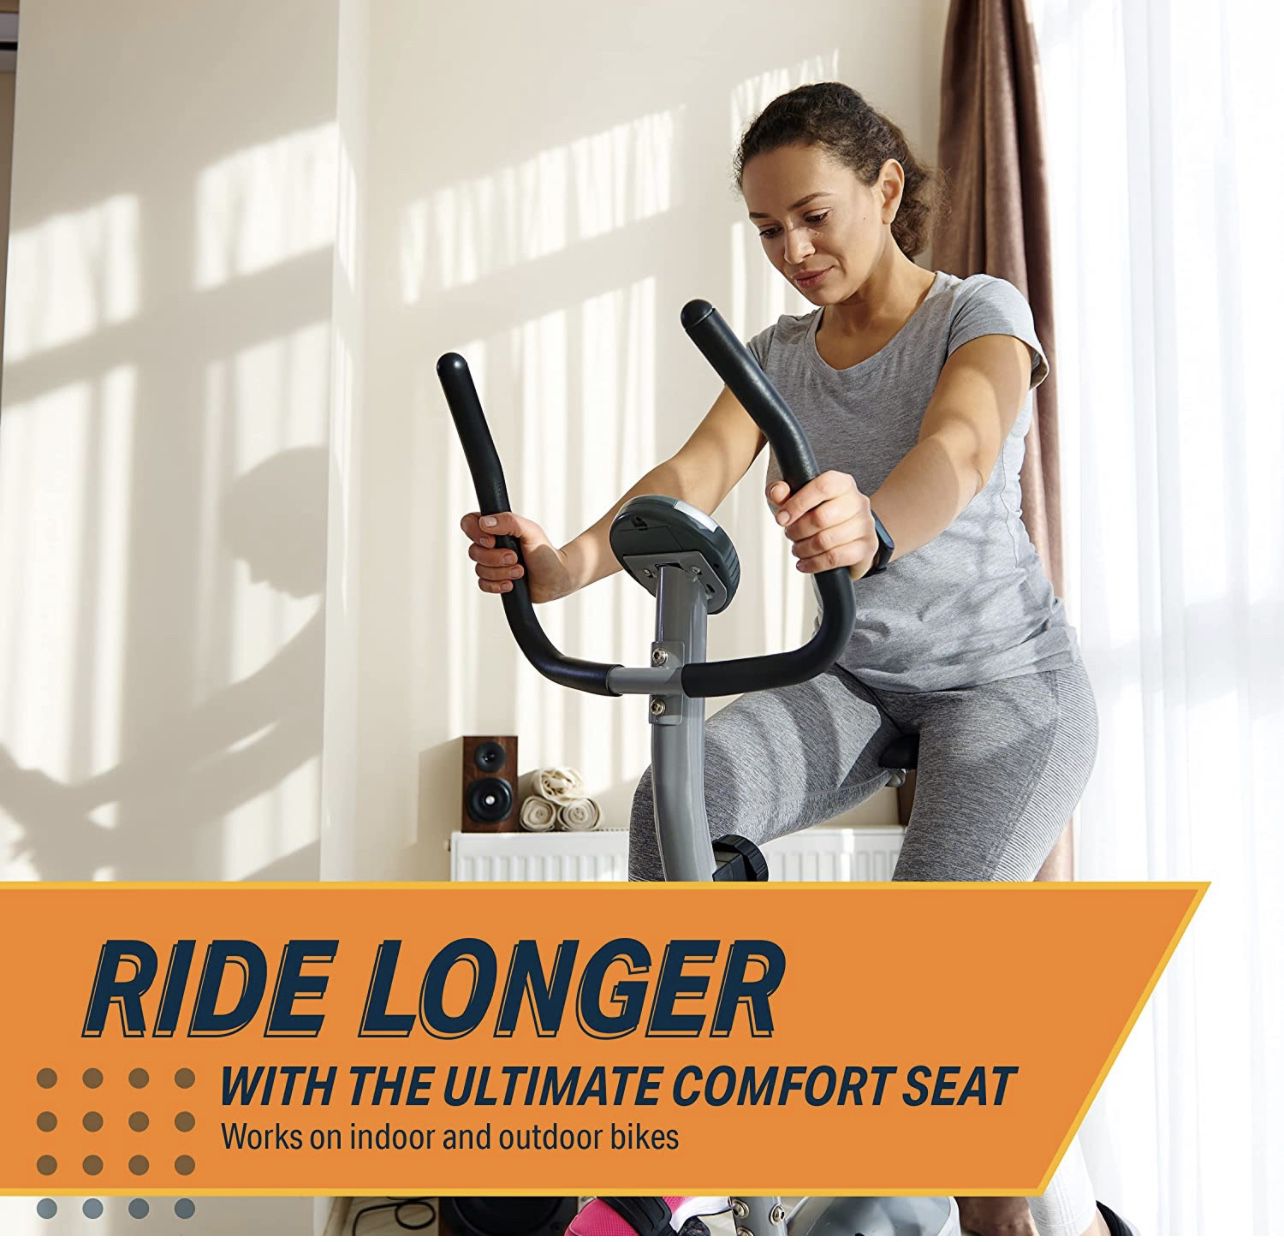 Oversized Bike Seat - Compatible with Peloton, Exercise or Road Bikes - Bicycle Saddle Replacement with Wide Cushion for Men & Womens Comfort